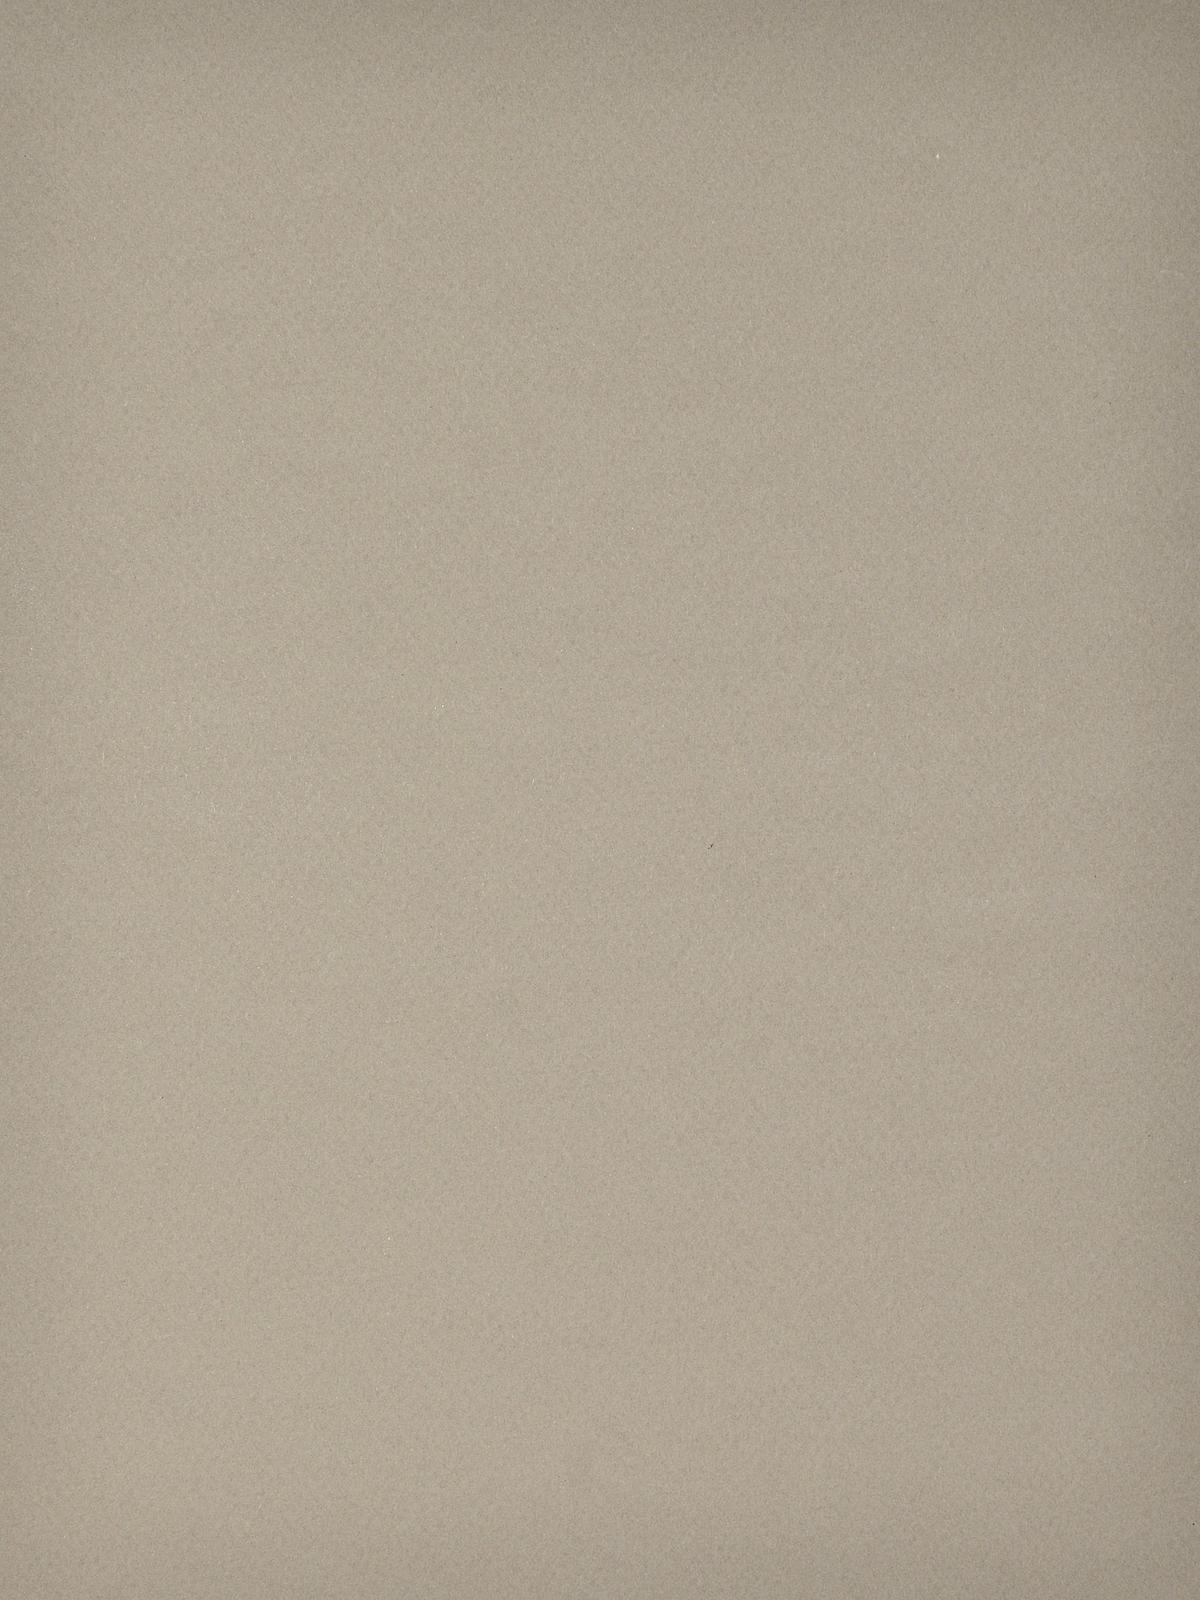 Mi-teintes Tinted Paper Sand 8.5 In. X 11 In.